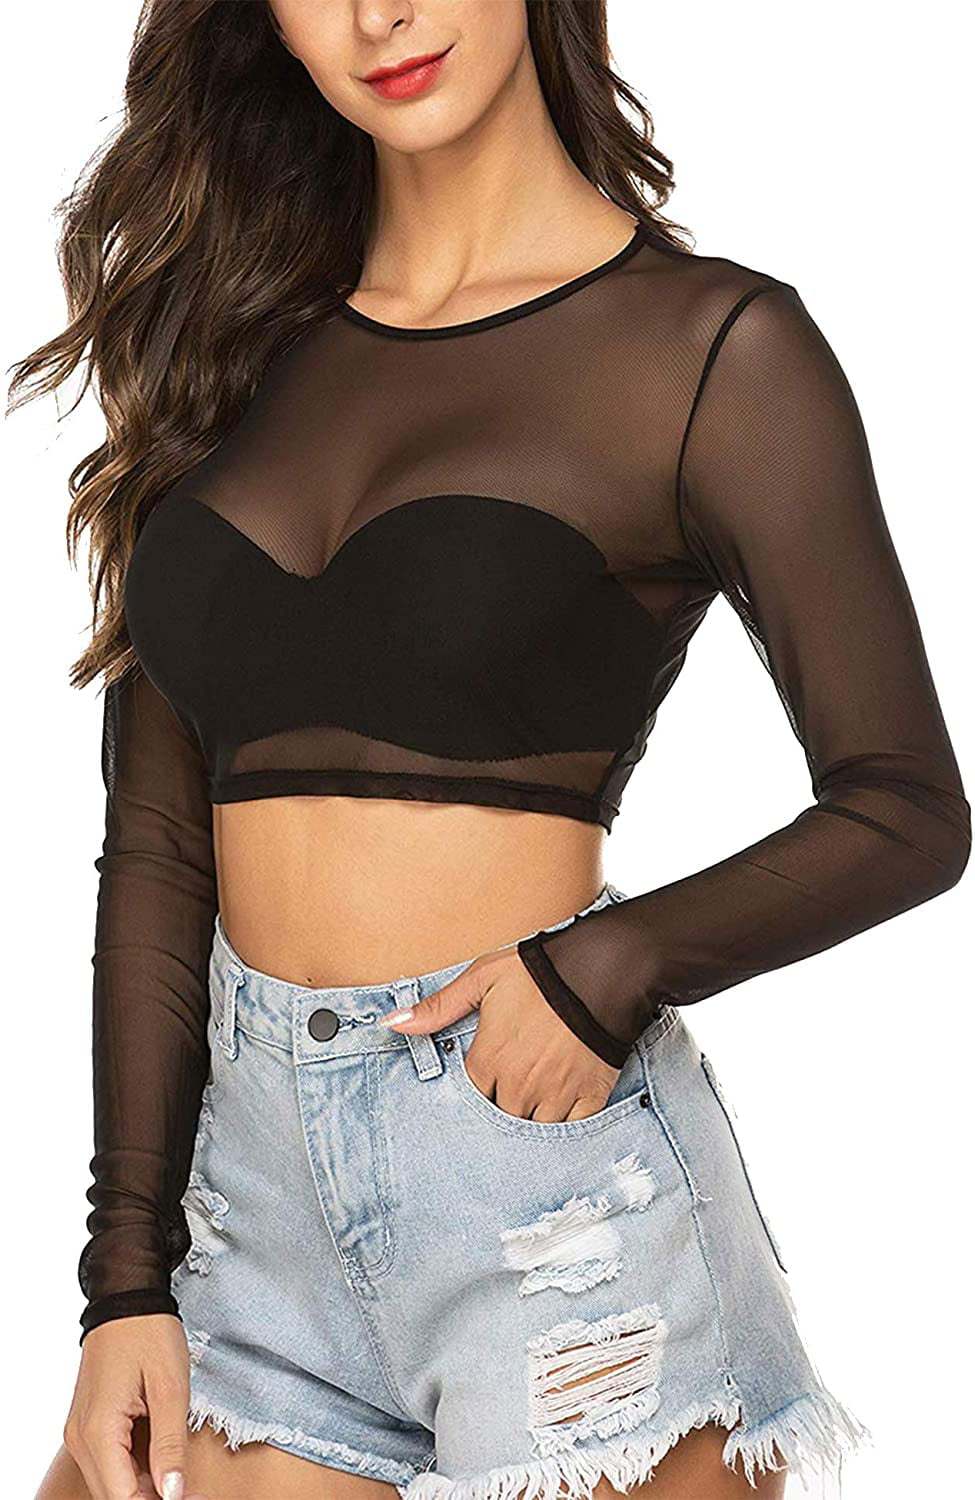 exaggerate make you annoyed Exist black mesh crop top